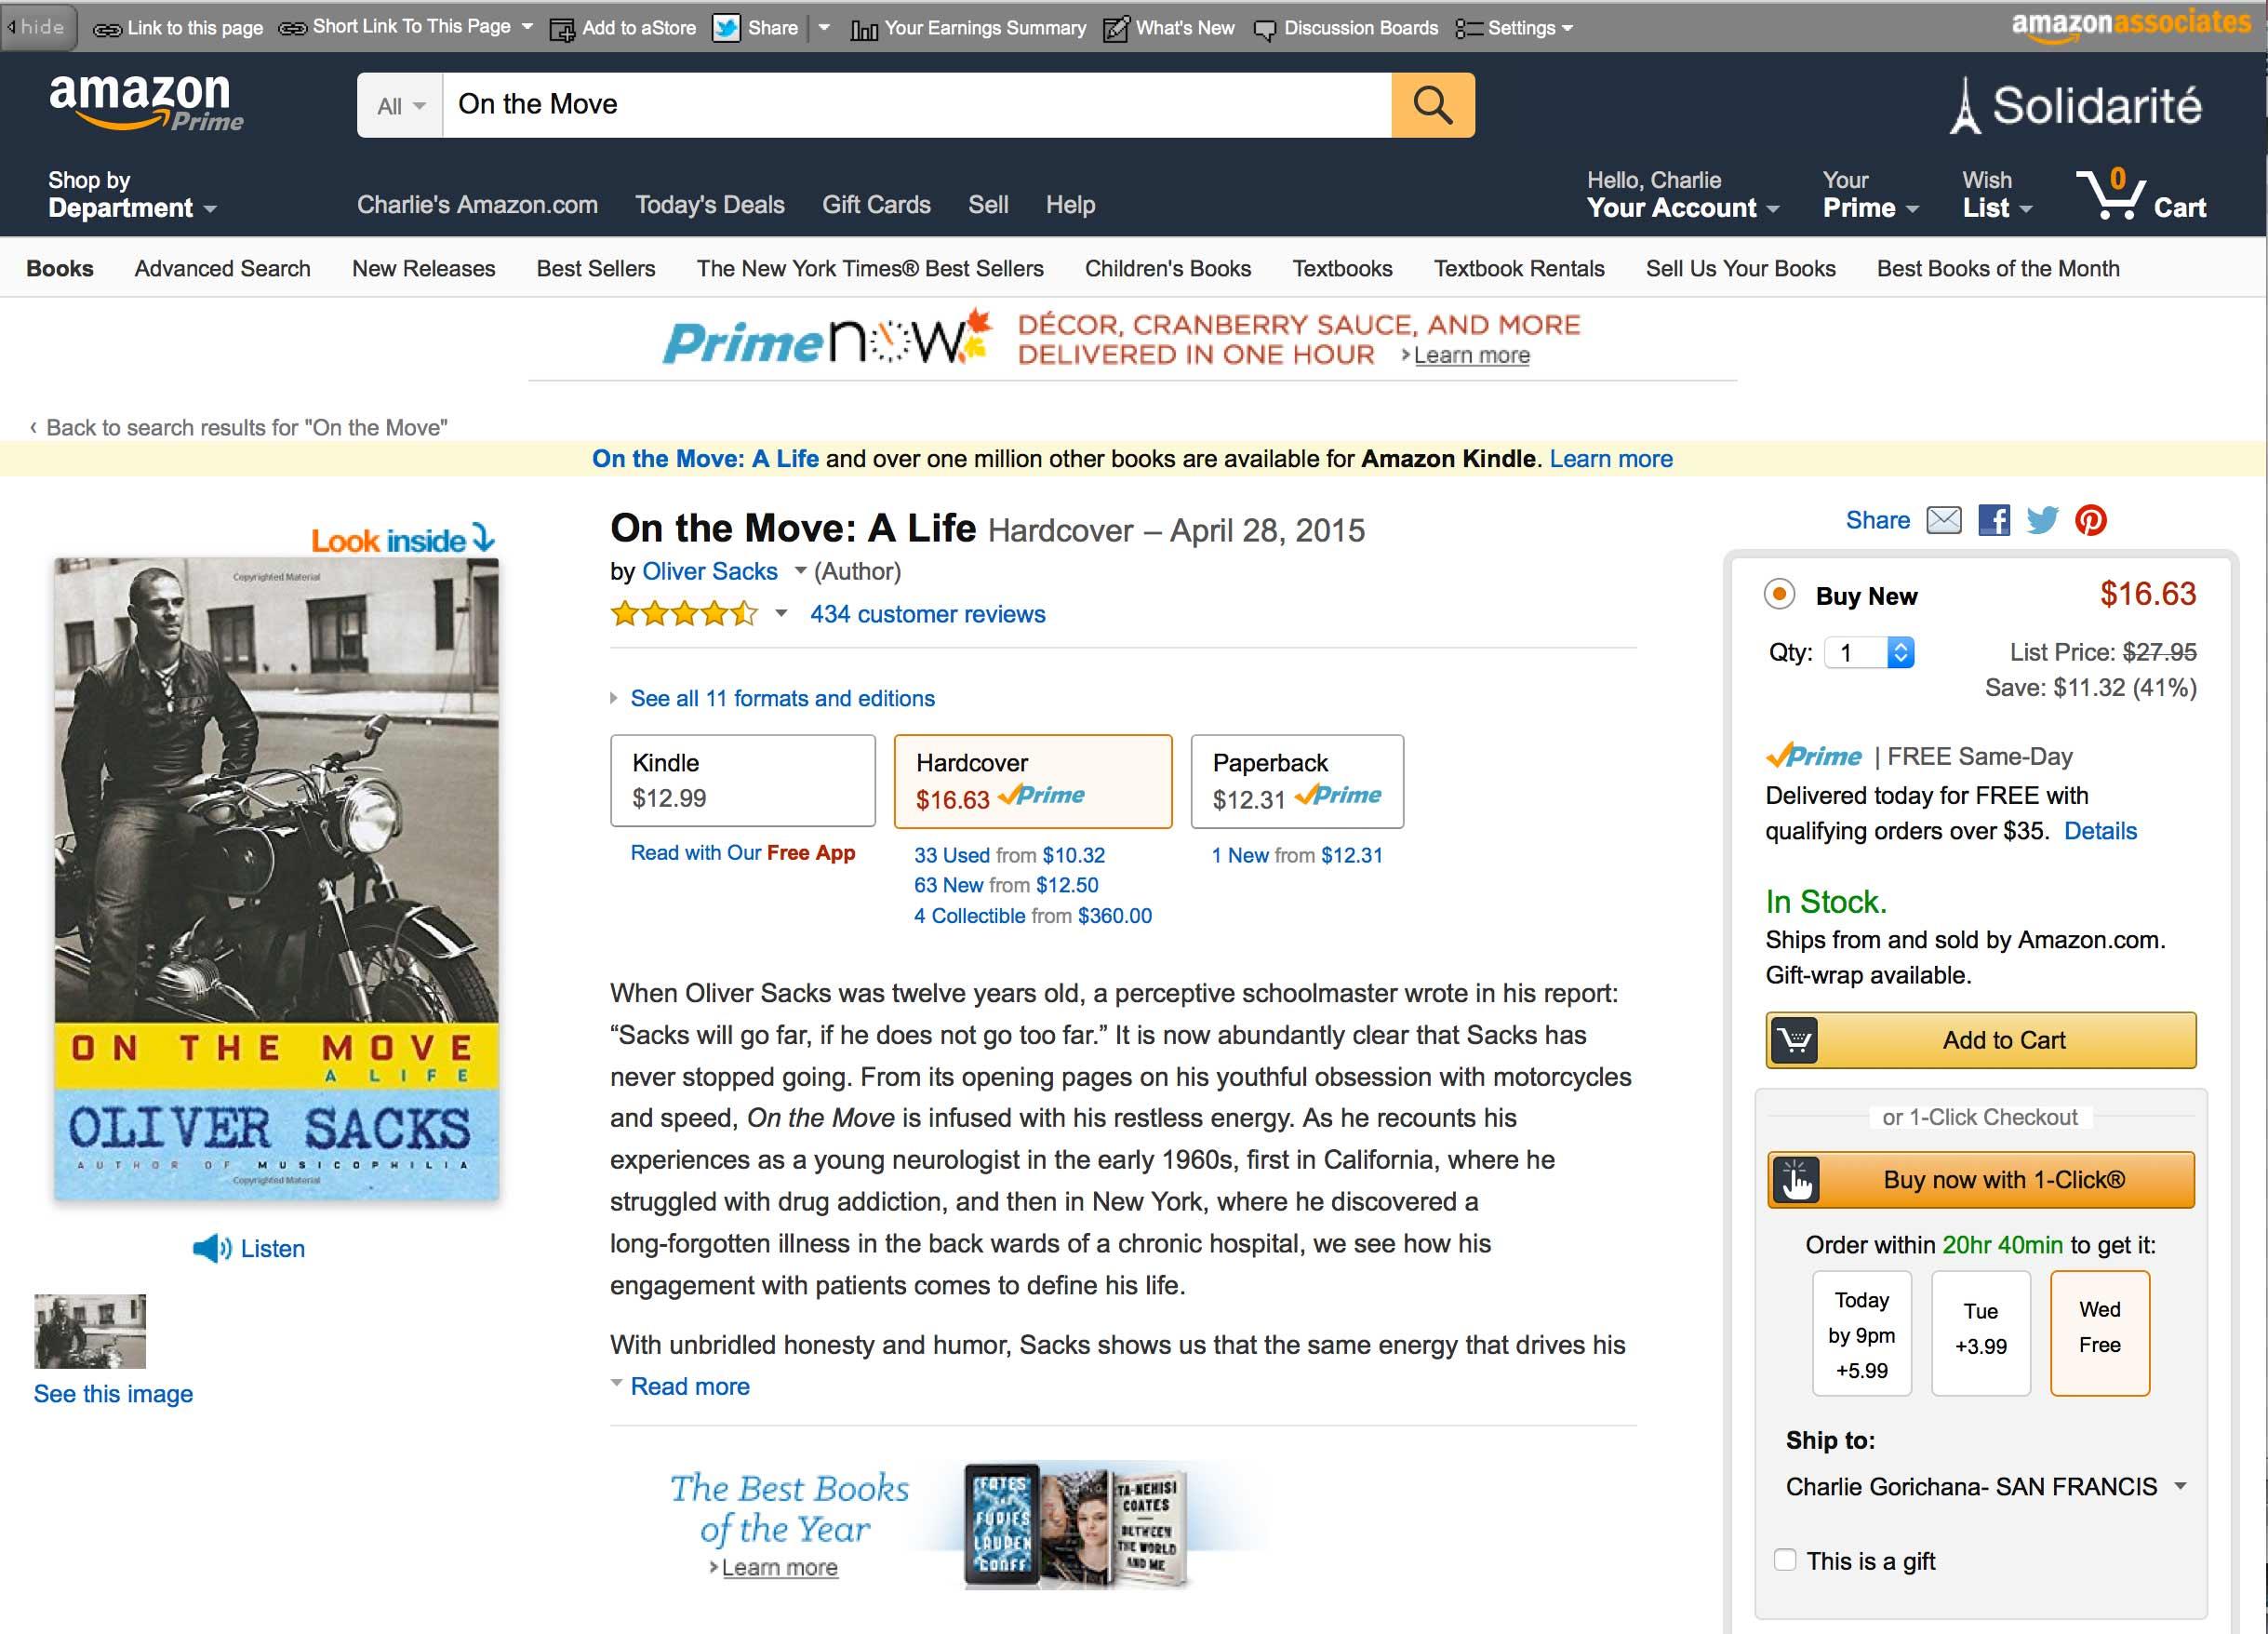 Amazon listing for "On the Move: A Life"